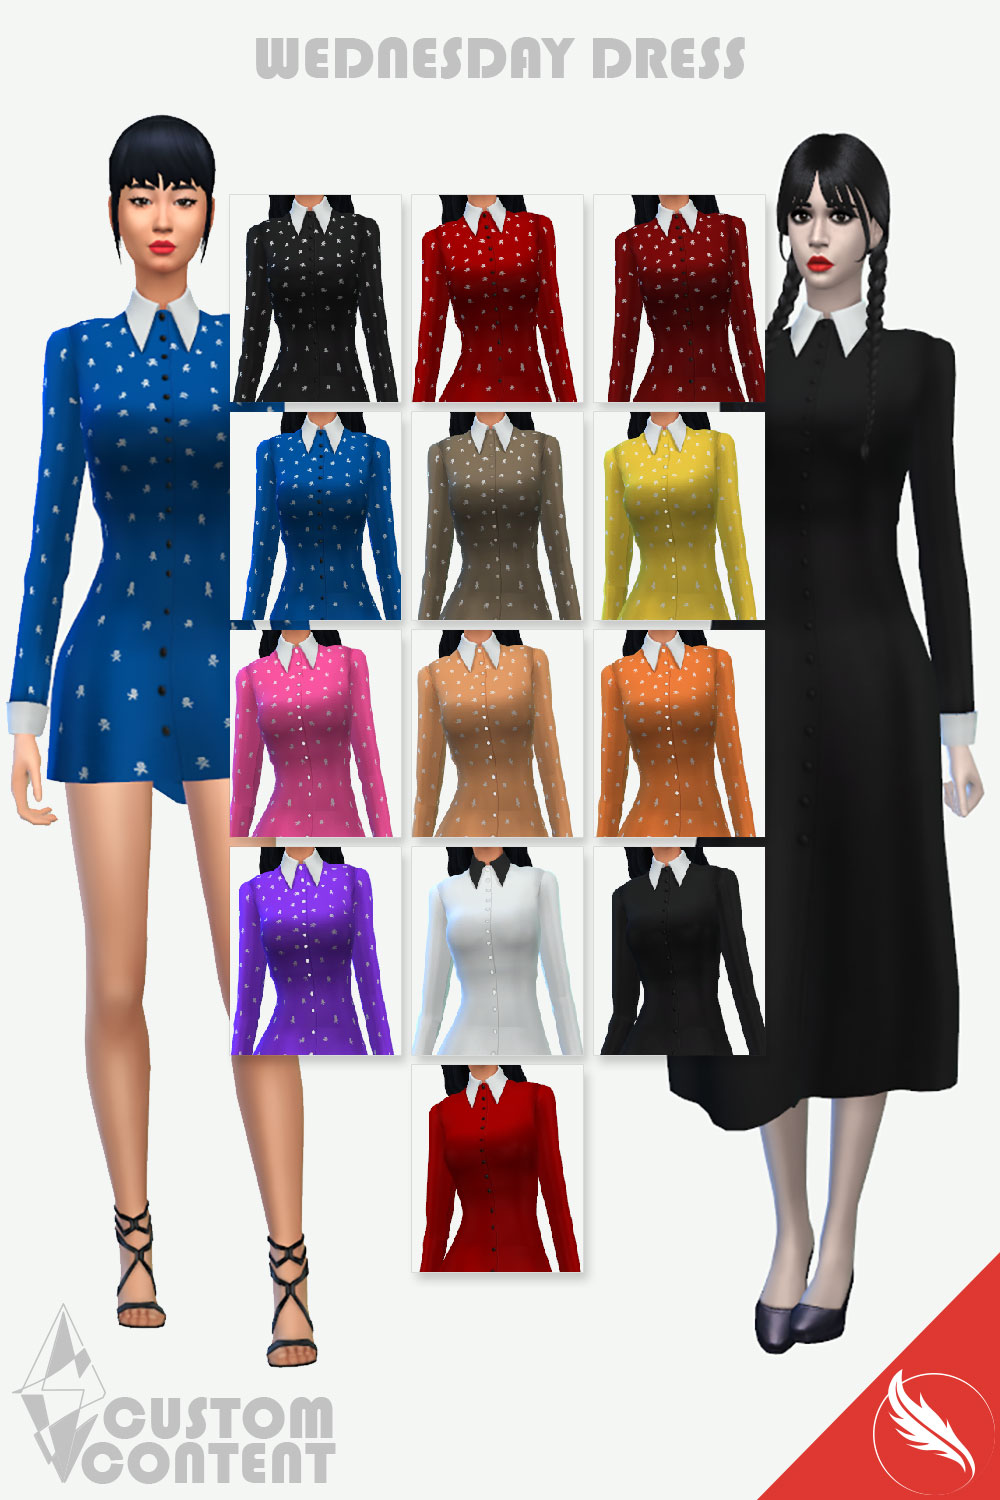 The Sims 4 Wednesday Dress Colors